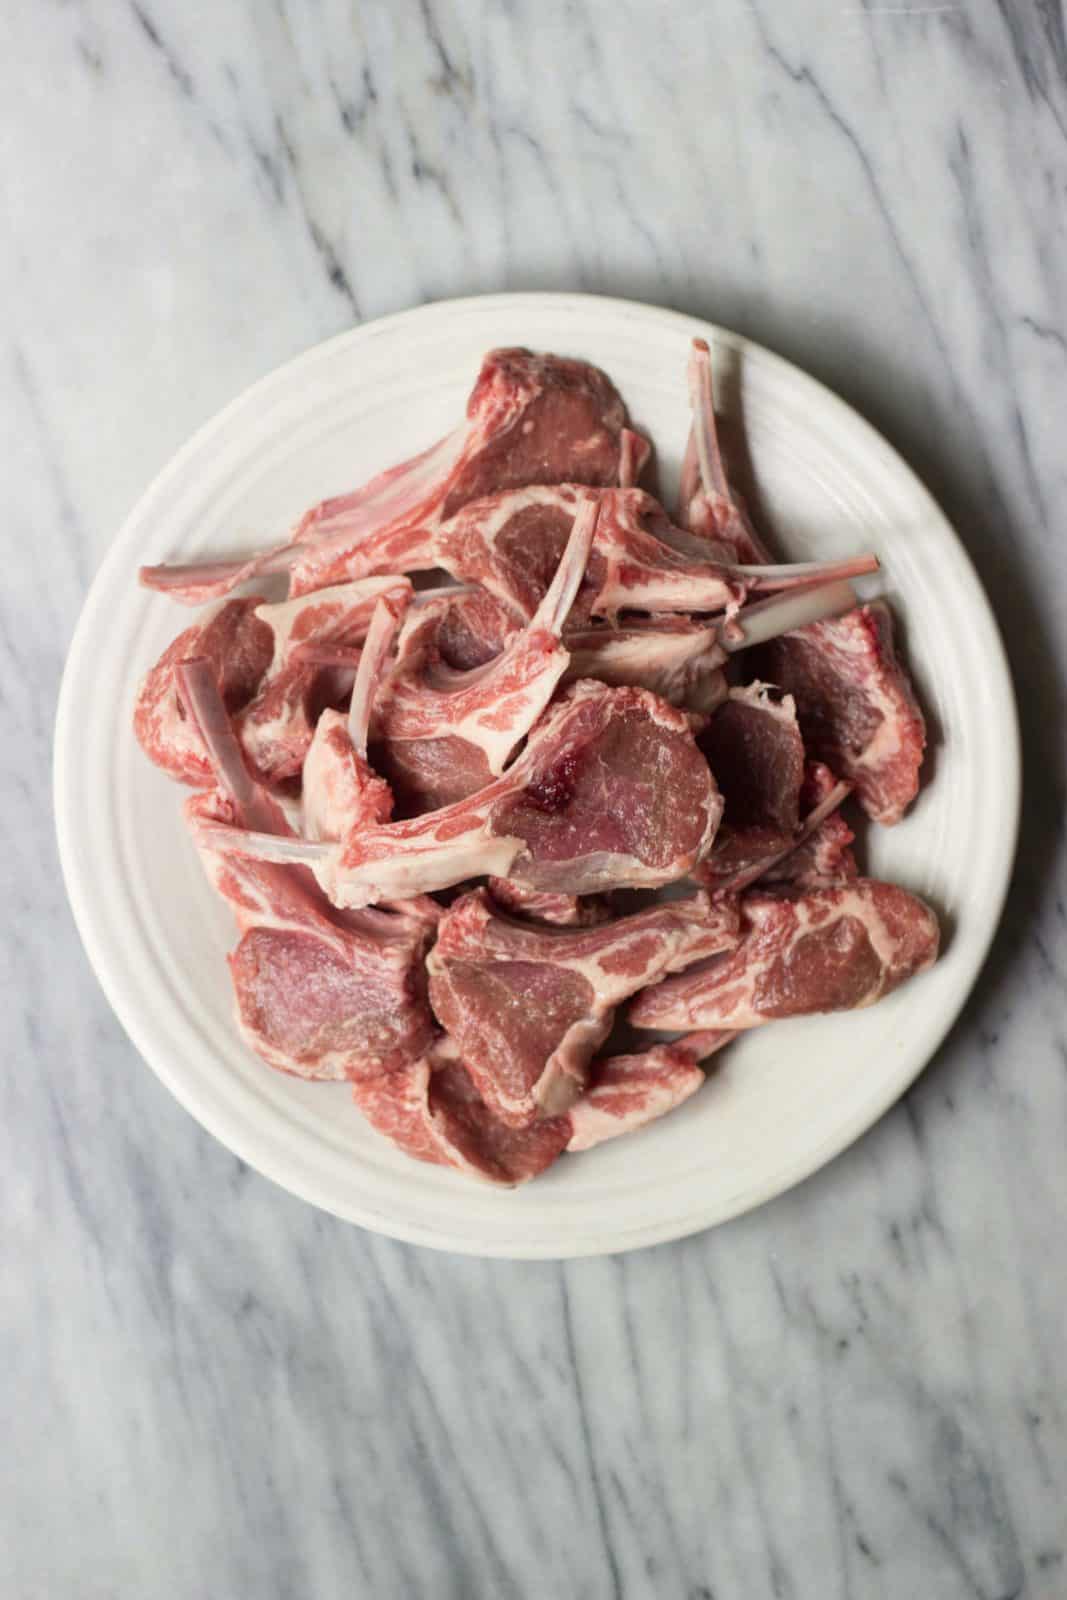 Raw lamb on a white plate.